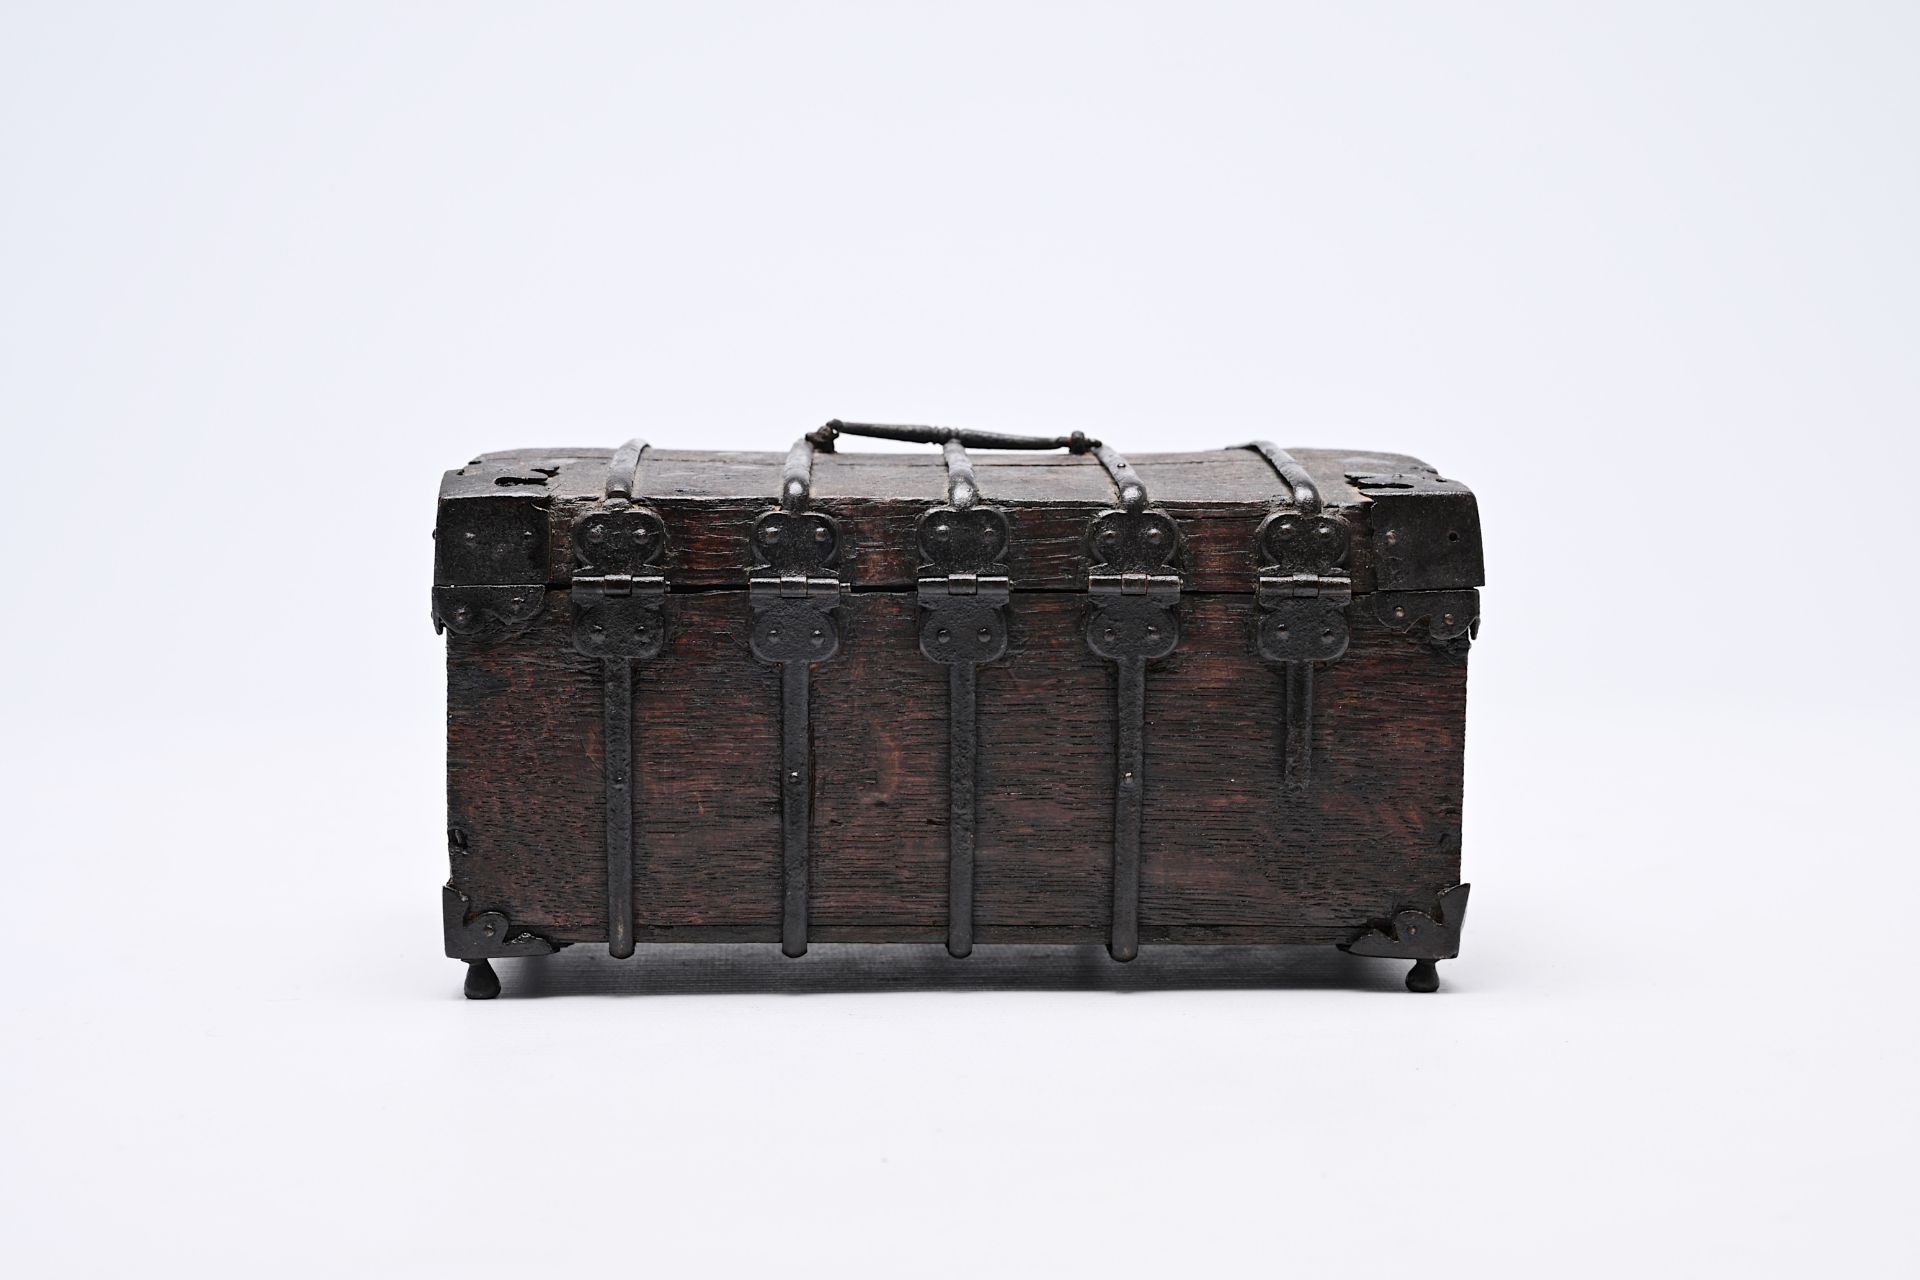 A wooden chest with iron mounts, Western Europe, 16th C. - Image 4 of 11